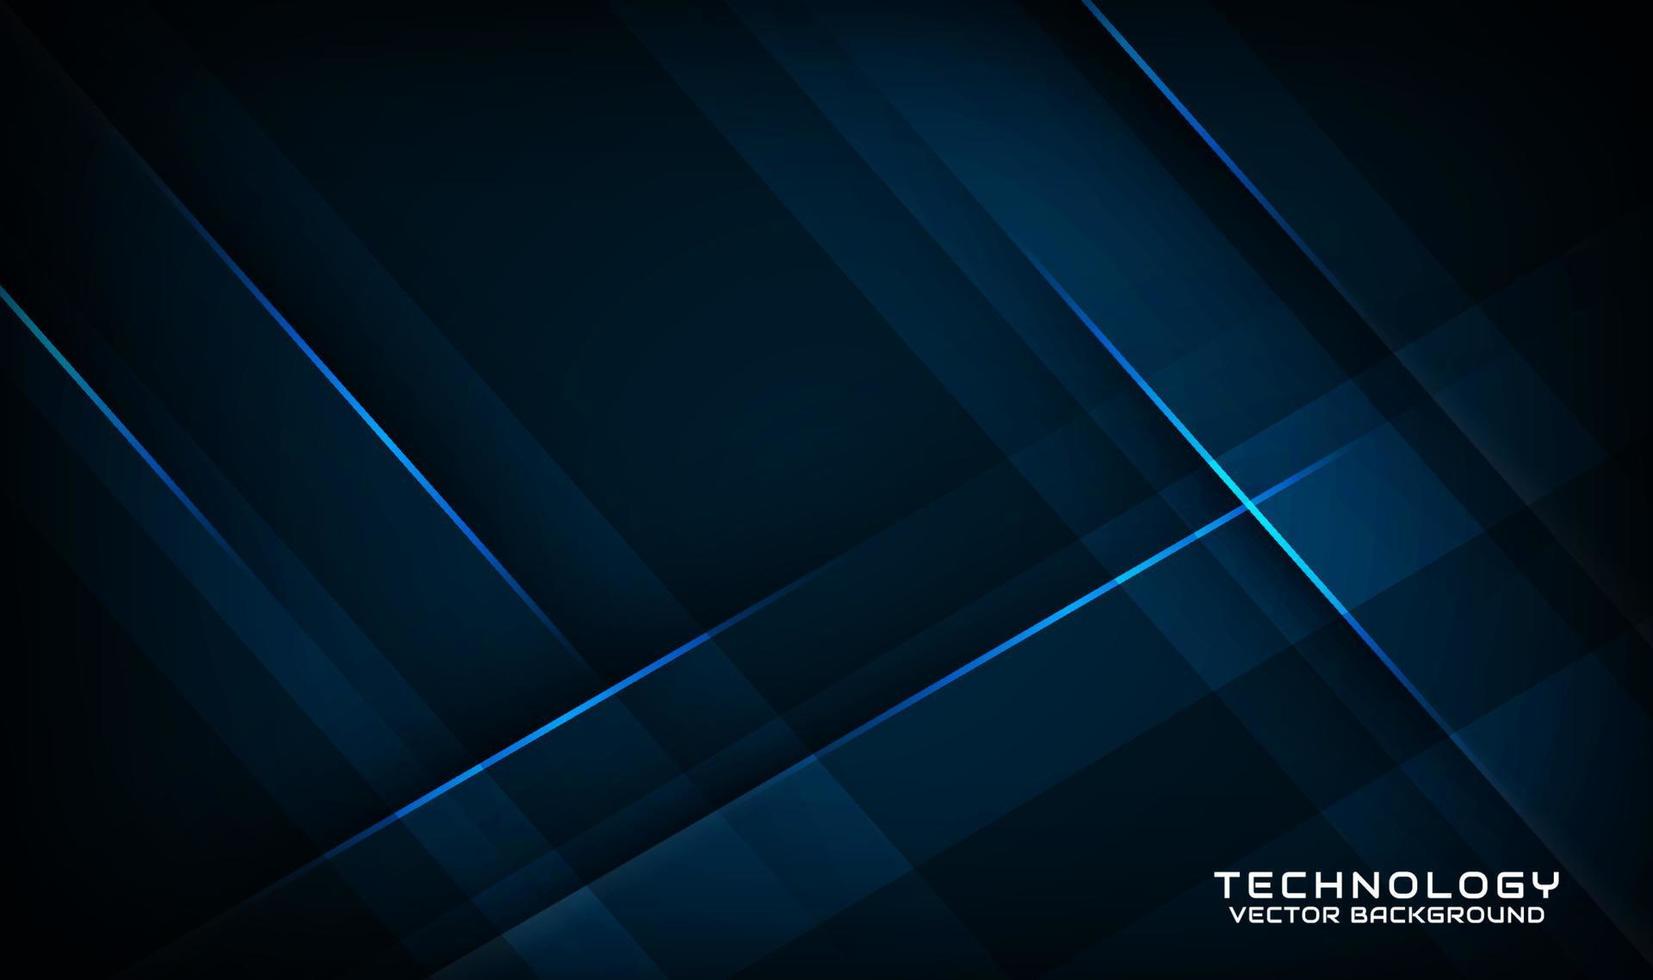 3D blue technology abstract background overlap layer on dark space with light line effect decoration. Graphic design element future style concept for banner, flyer, card, brochure, or landing page vector